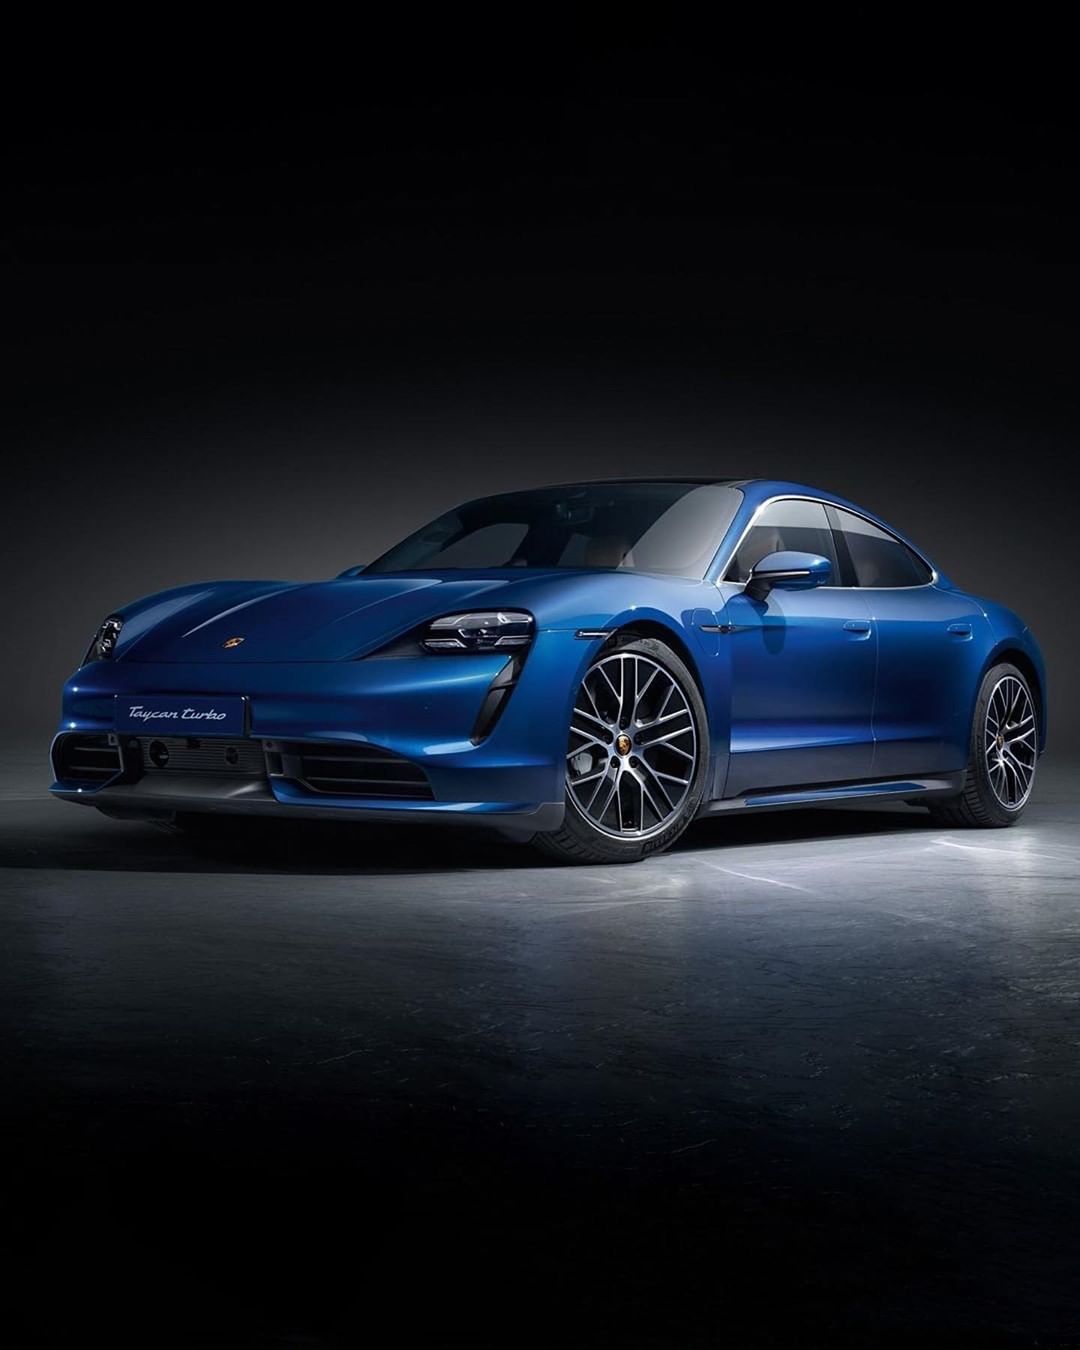 Porsche Taycan Porsche Taycan World Reveal. Watch Live Feed and React Here 67817275_130321924948958_4347523962997476924_n